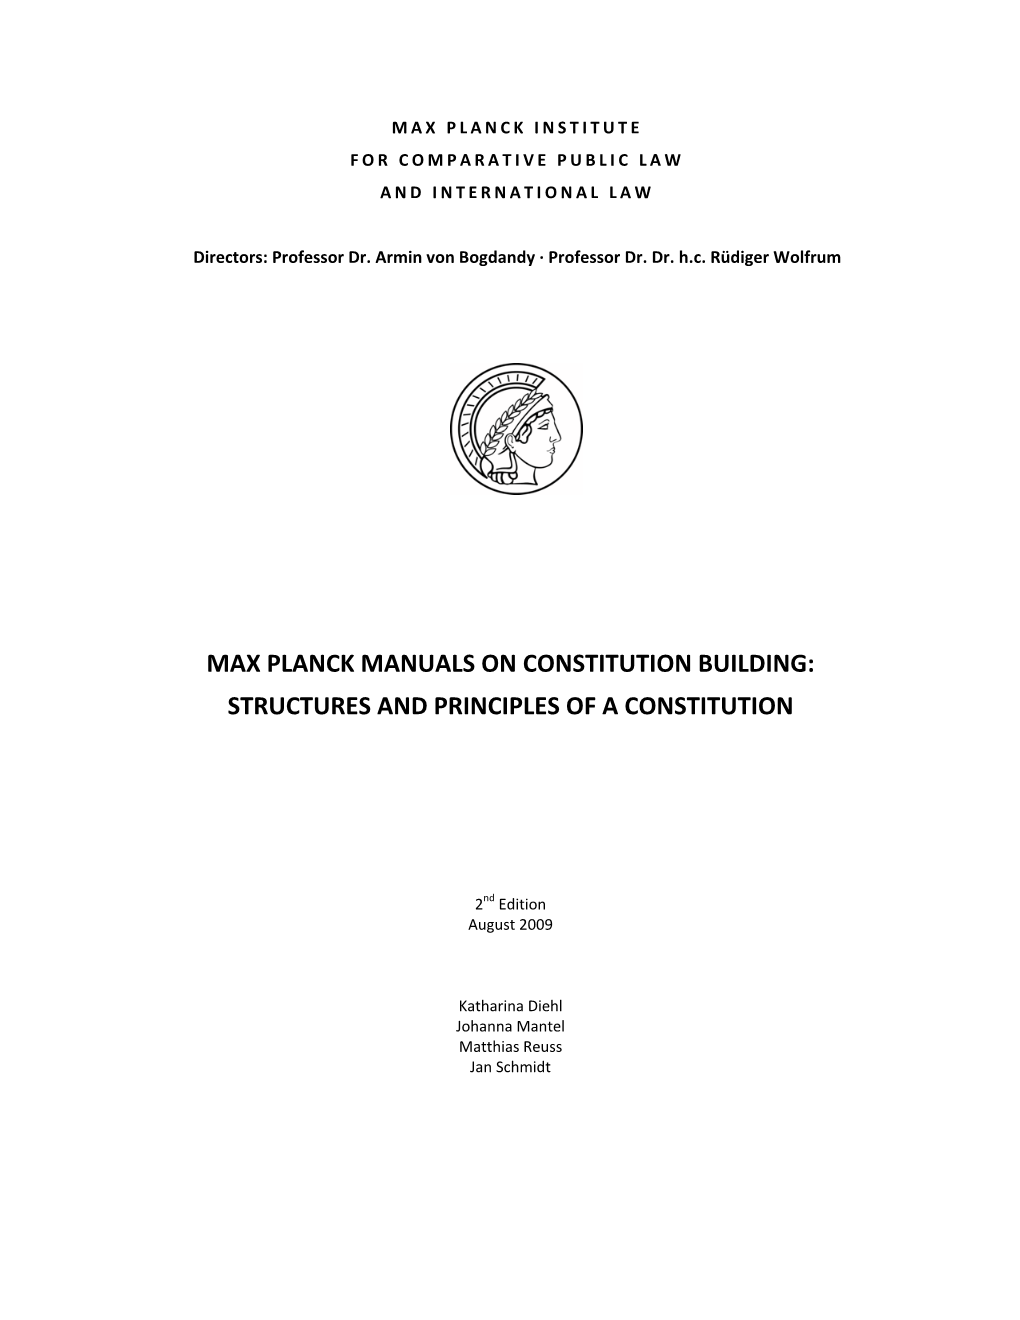 Max Planck Manuals on Constitution Building: Structures and Principles of a Constitution